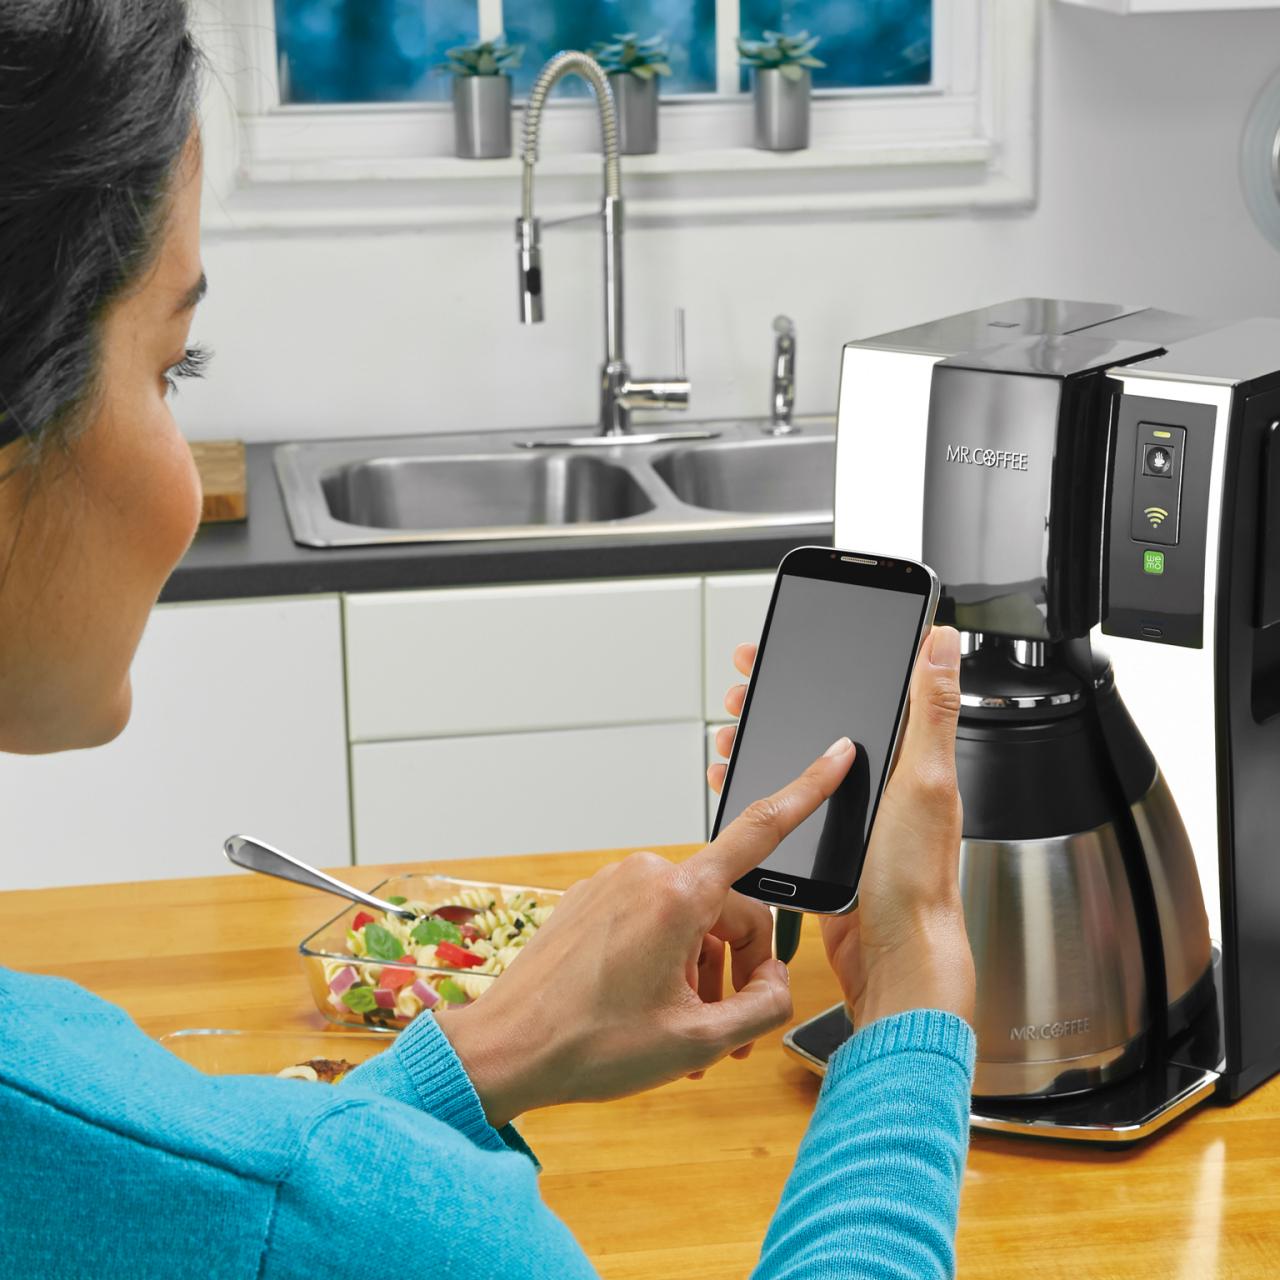 8 Smart Appliances for Easier Cooking and Cleaning